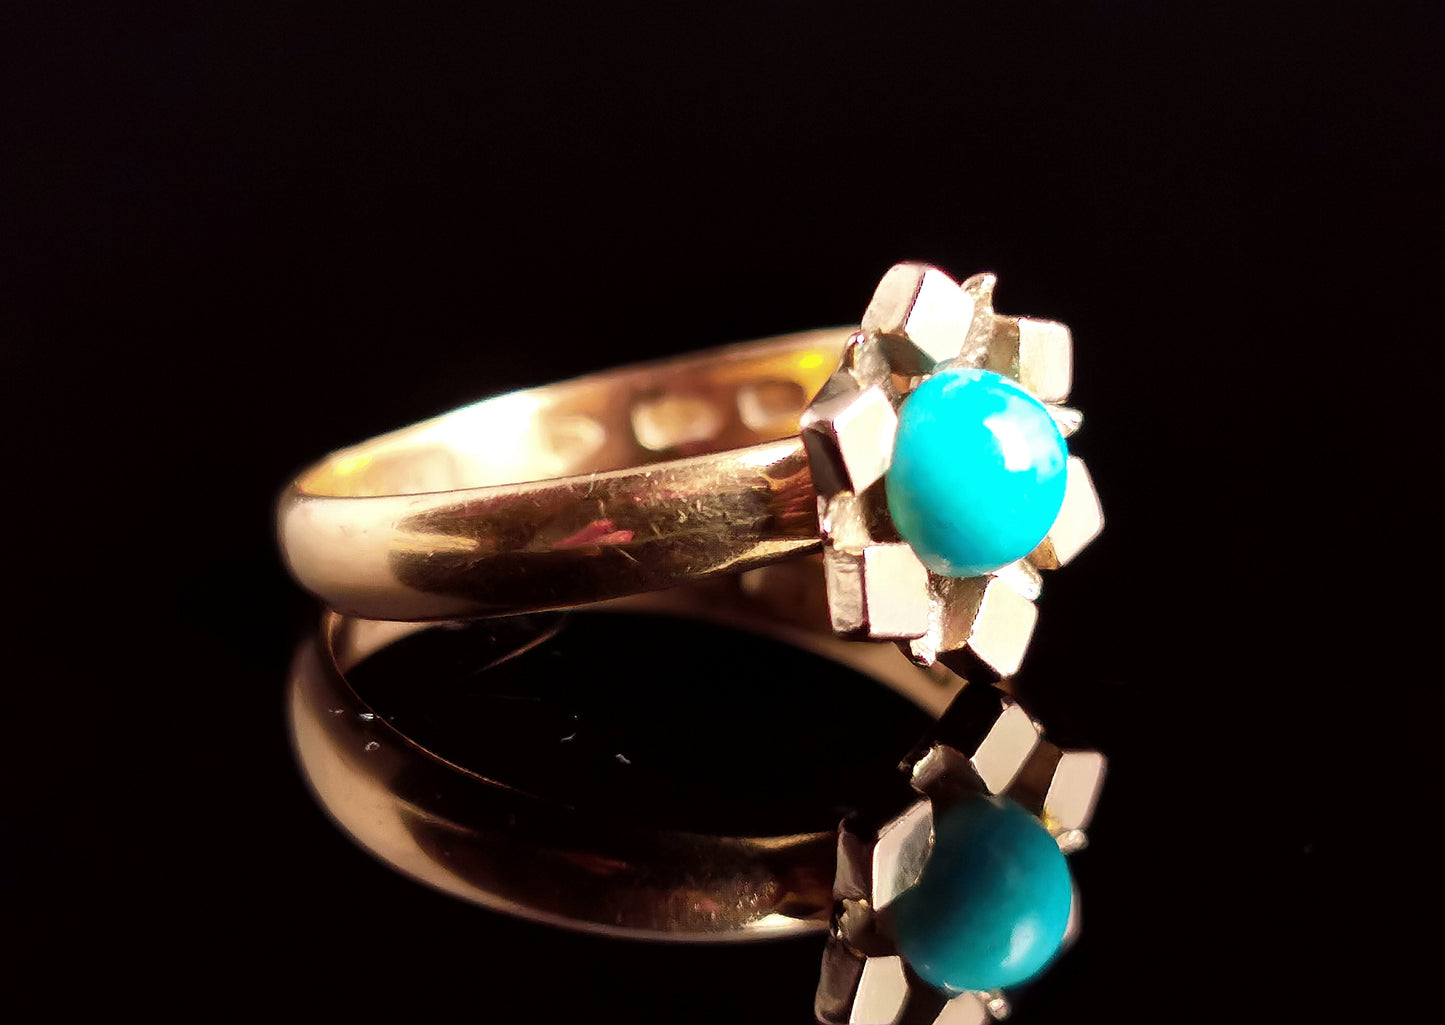 Antique Victorian 22ct gold band ring, Turquoise flower